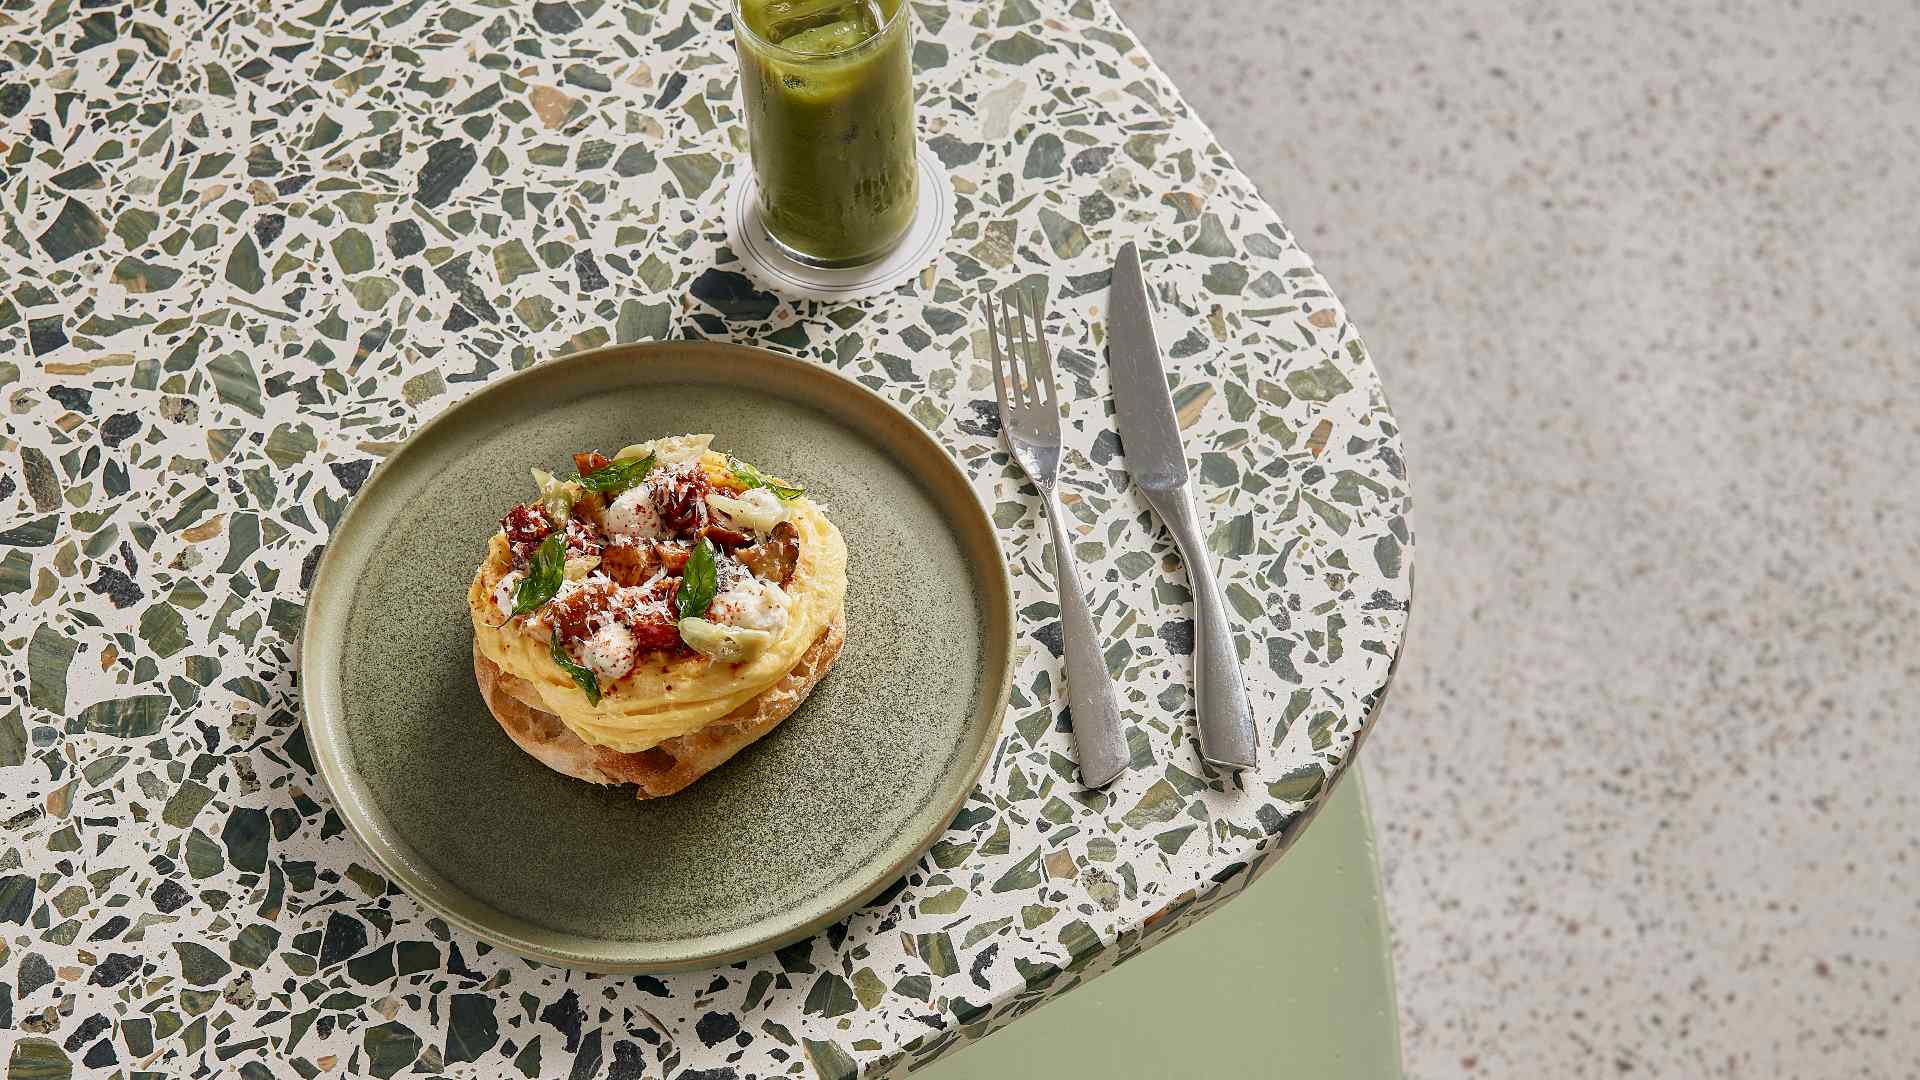 The Royal Botanic Gardens' Newly Transformed Cafe and Events Space Opens This Weekend